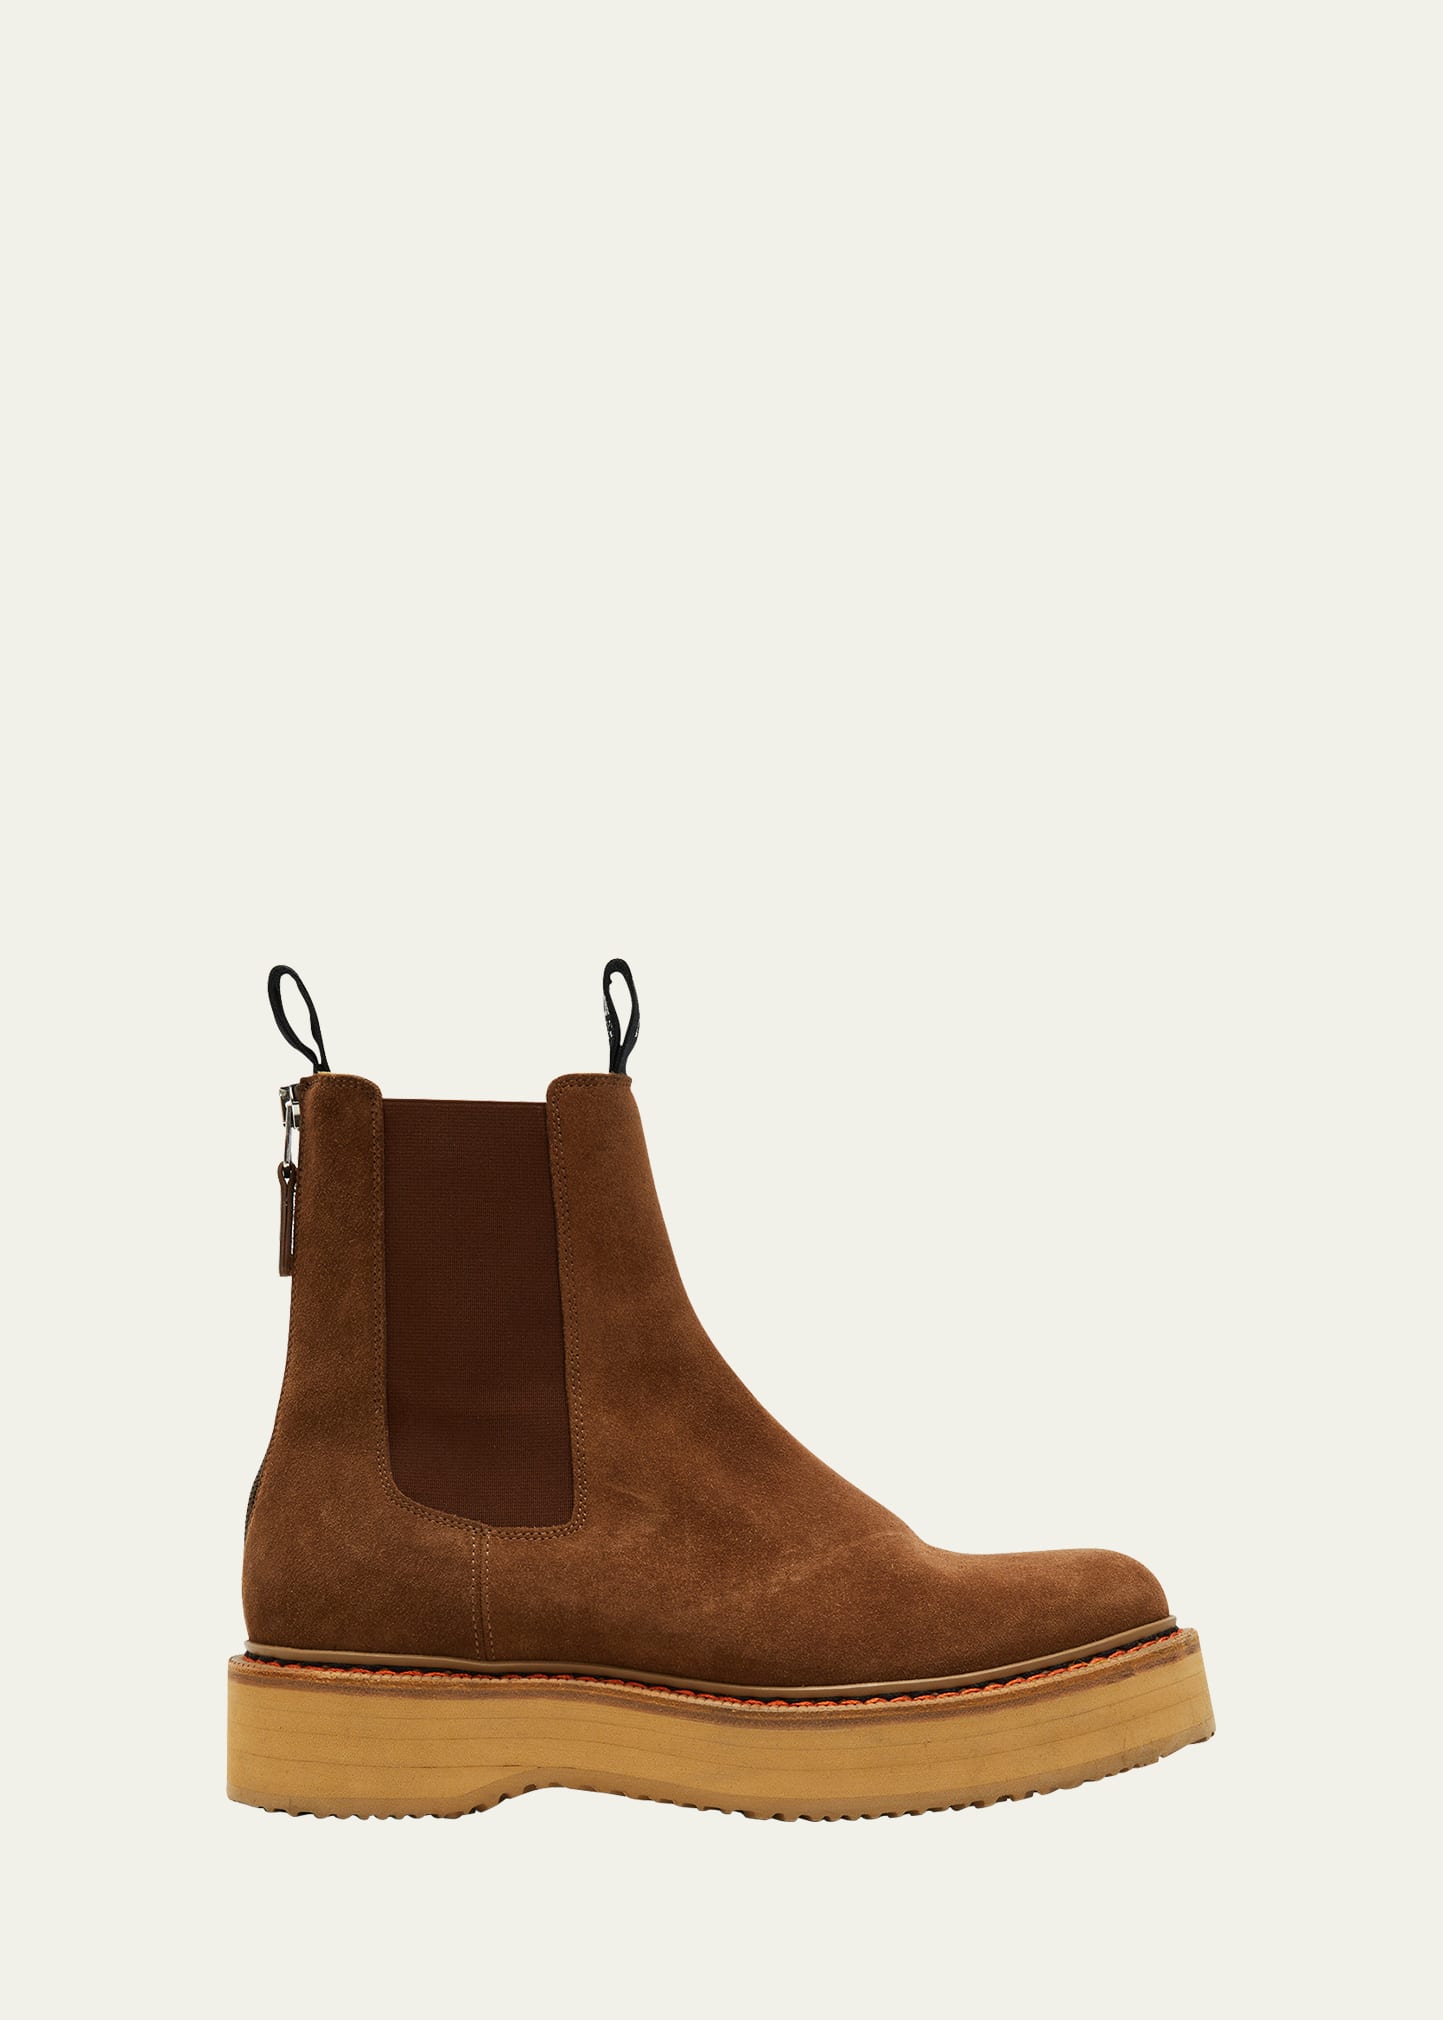 R13 Single Stack Suede Chelsea Boots In Brown Suede